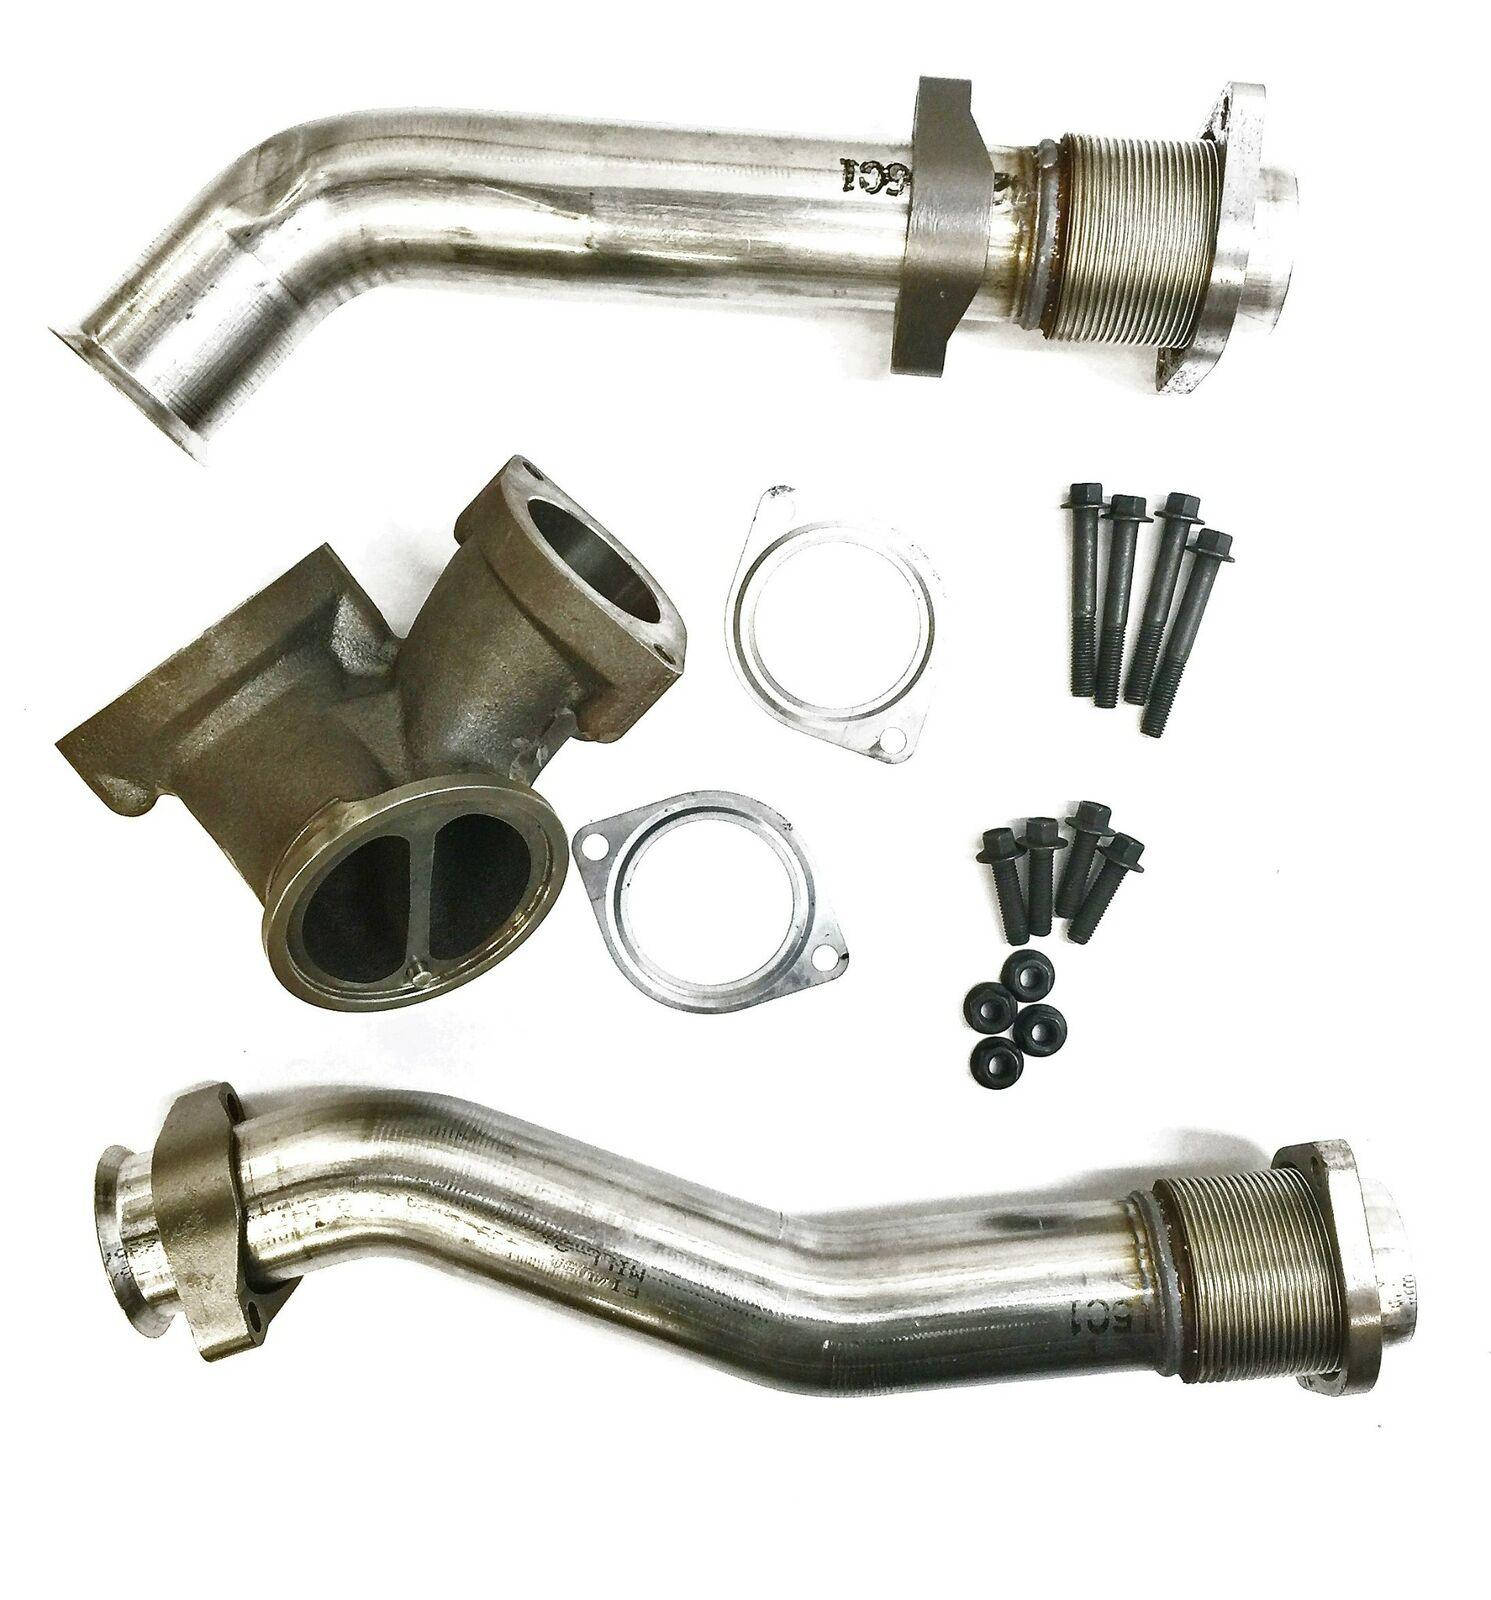 1837872C93 Genuine International® Adapter Kit Bellows Exhaust For T444E 7.3L V8 - ADVANCED TRUCK PARTS